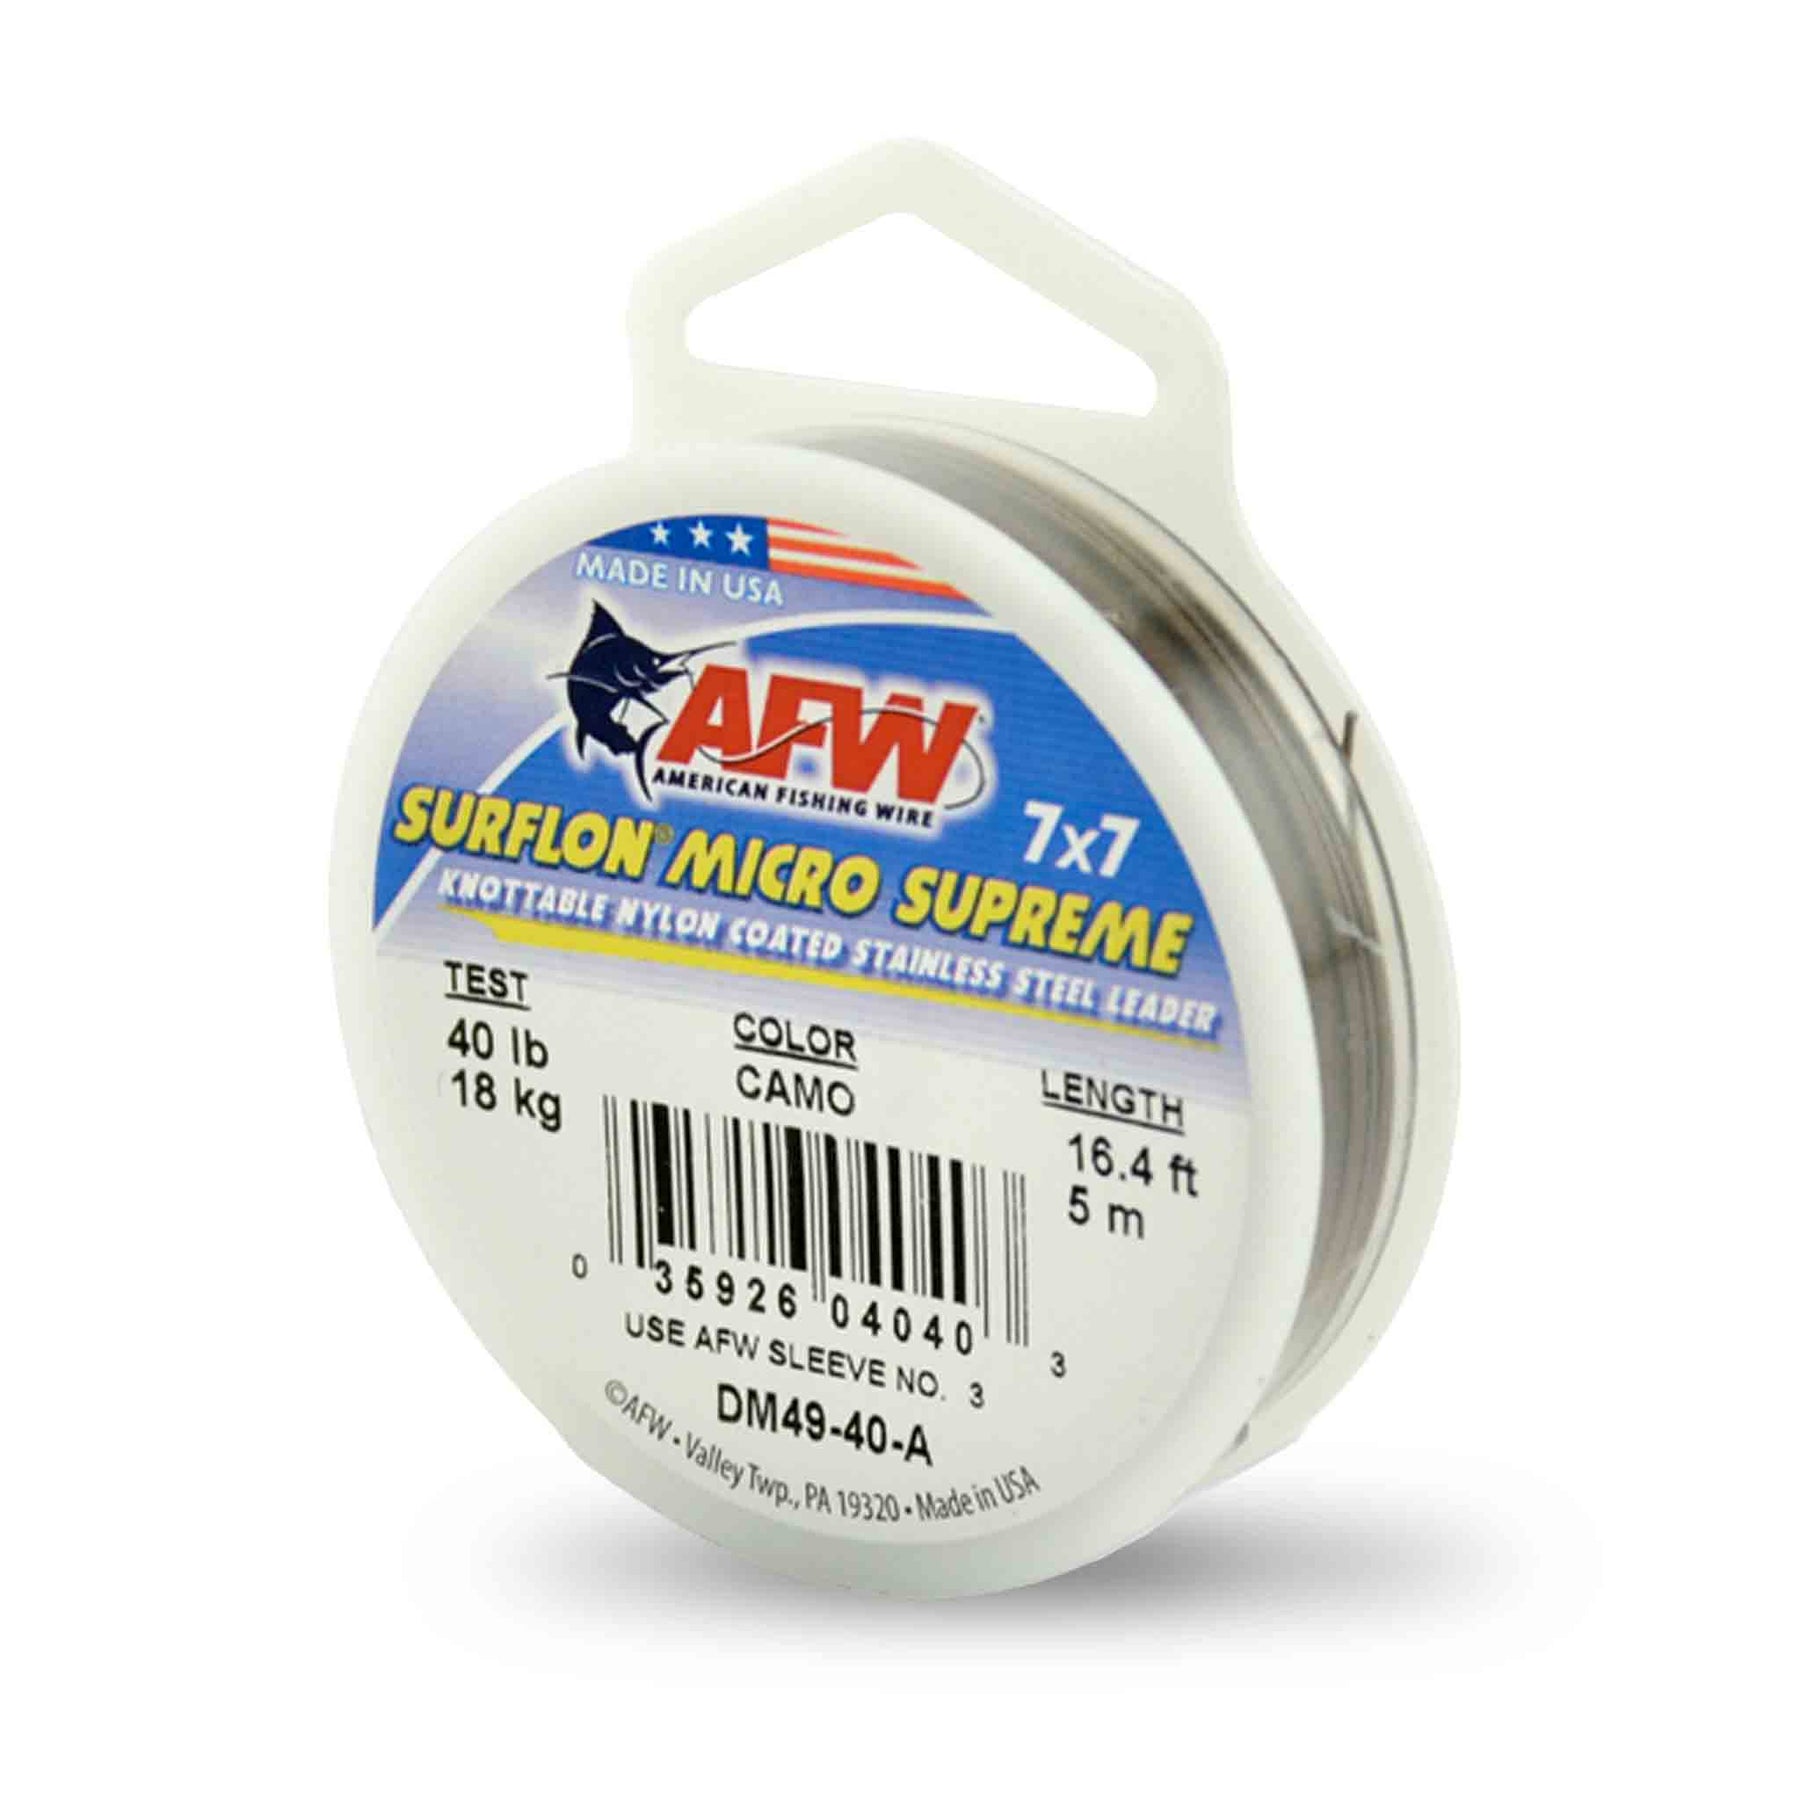 AFW Surfstrand Micro Supreme 7x7 40 lb Fly Leader Materials